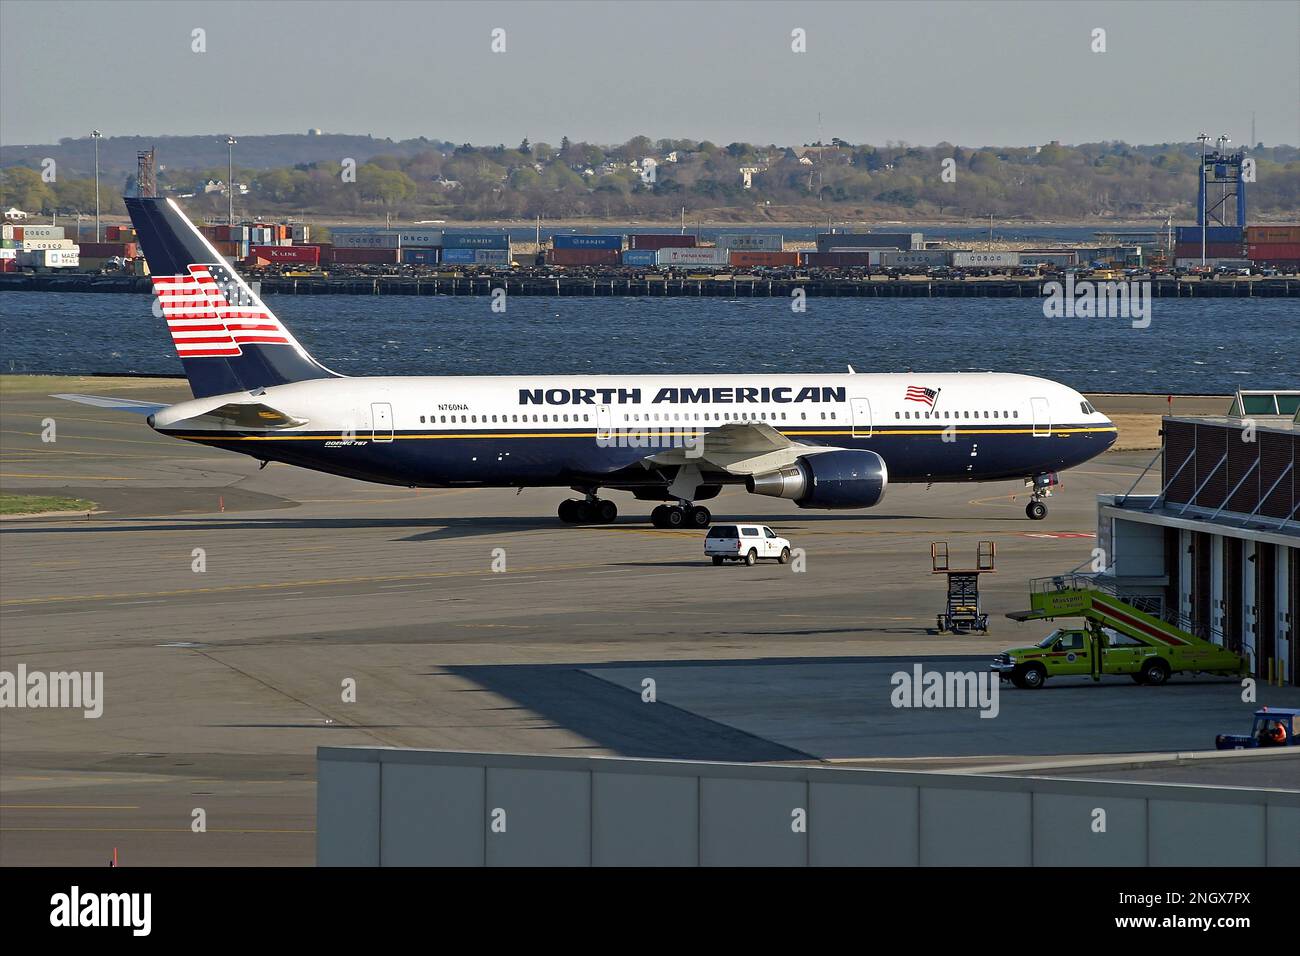 North American Airlines Boeing 767 charter plane parked on airport tarmac, colorful USA flag livery Stock Photo